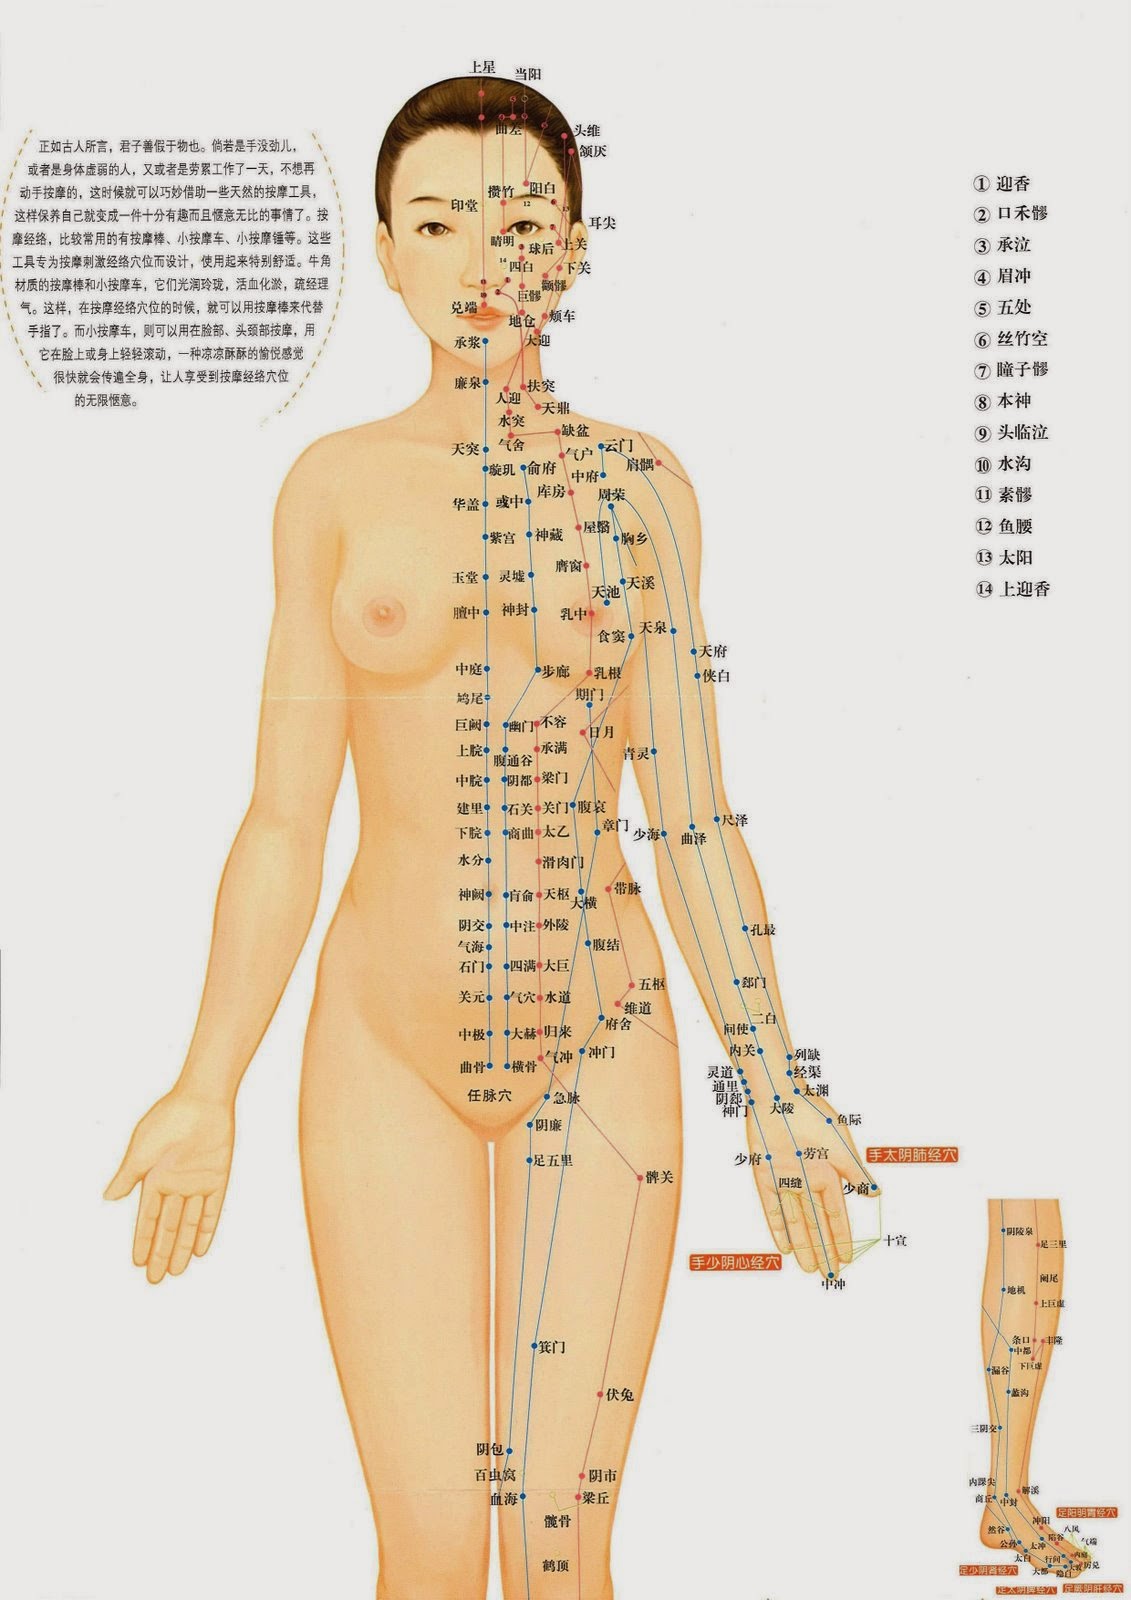 Holistic Health Philosophy and Practice: So How Does Acupuncture Work? 